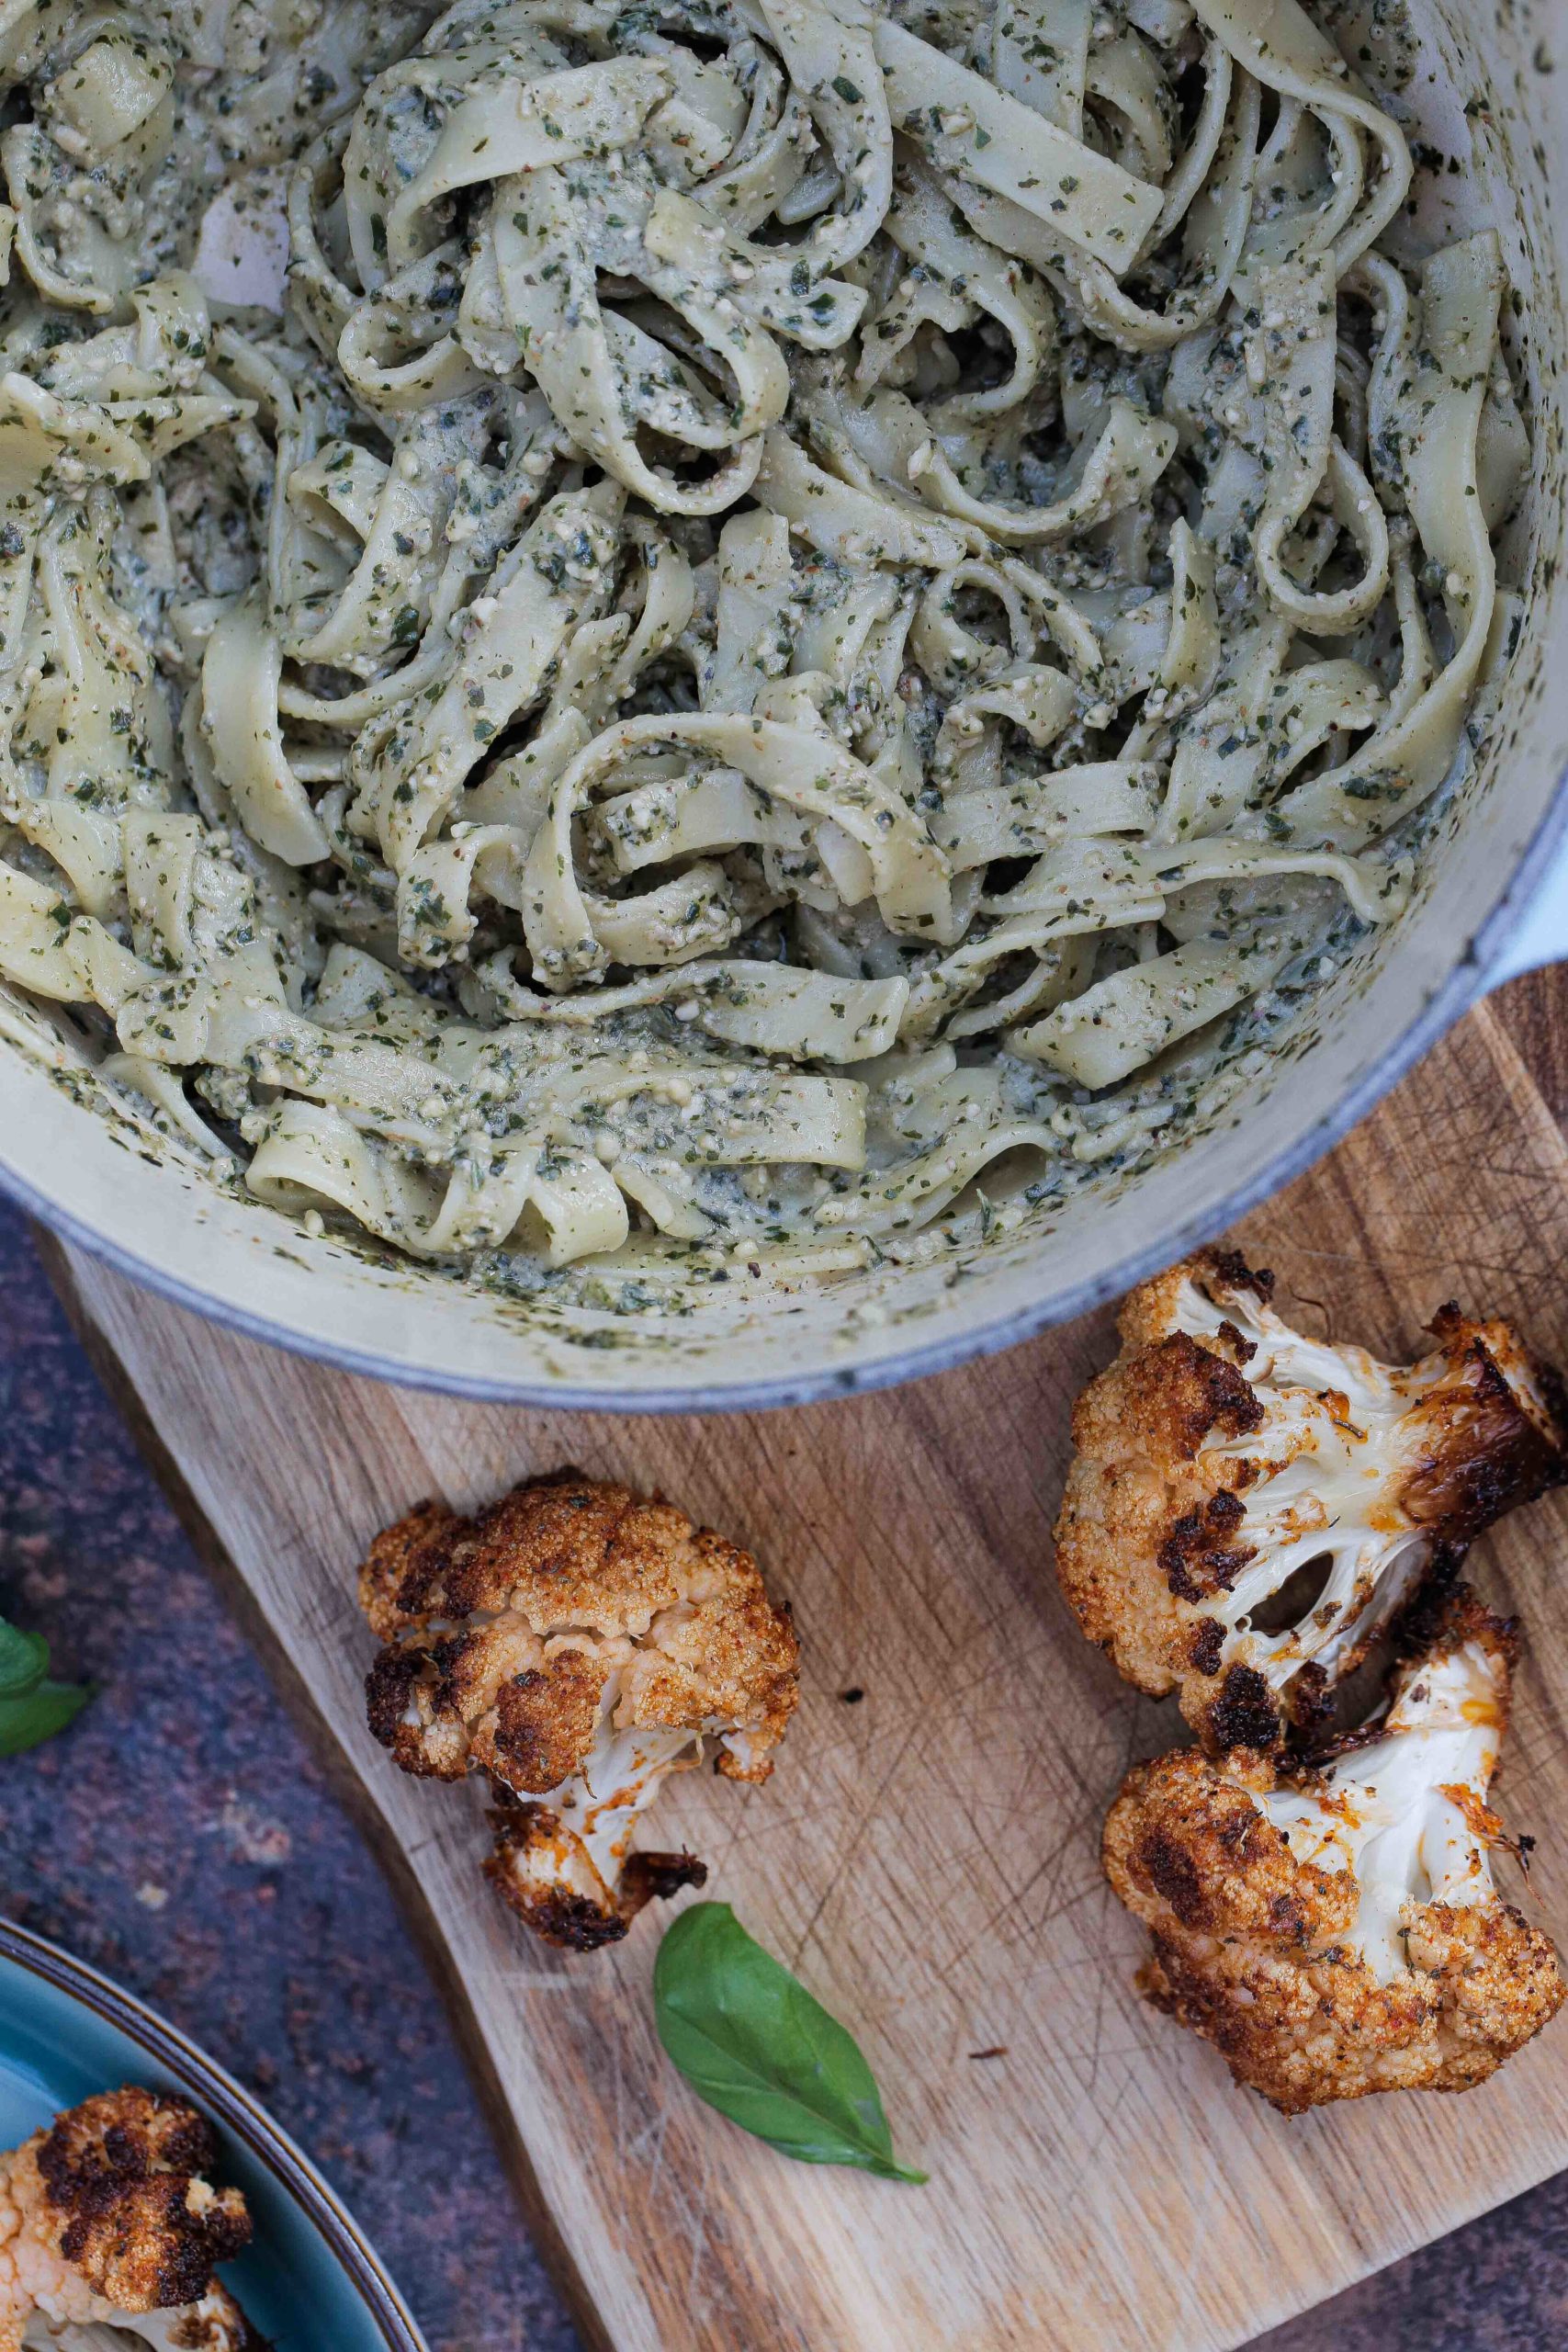 Herby basil pesto stirred through tagliatelle and topped with lightly spiced crispy roast cauliflower. A lovely contrast of textures and flavours that work perfectly together for an easy weeknight meal or date night deliciousness! Recipe on thecookandhim.com | #veganpesto #roastcauliflower #veganmeal #vegandinner #cauliflowerrecipes